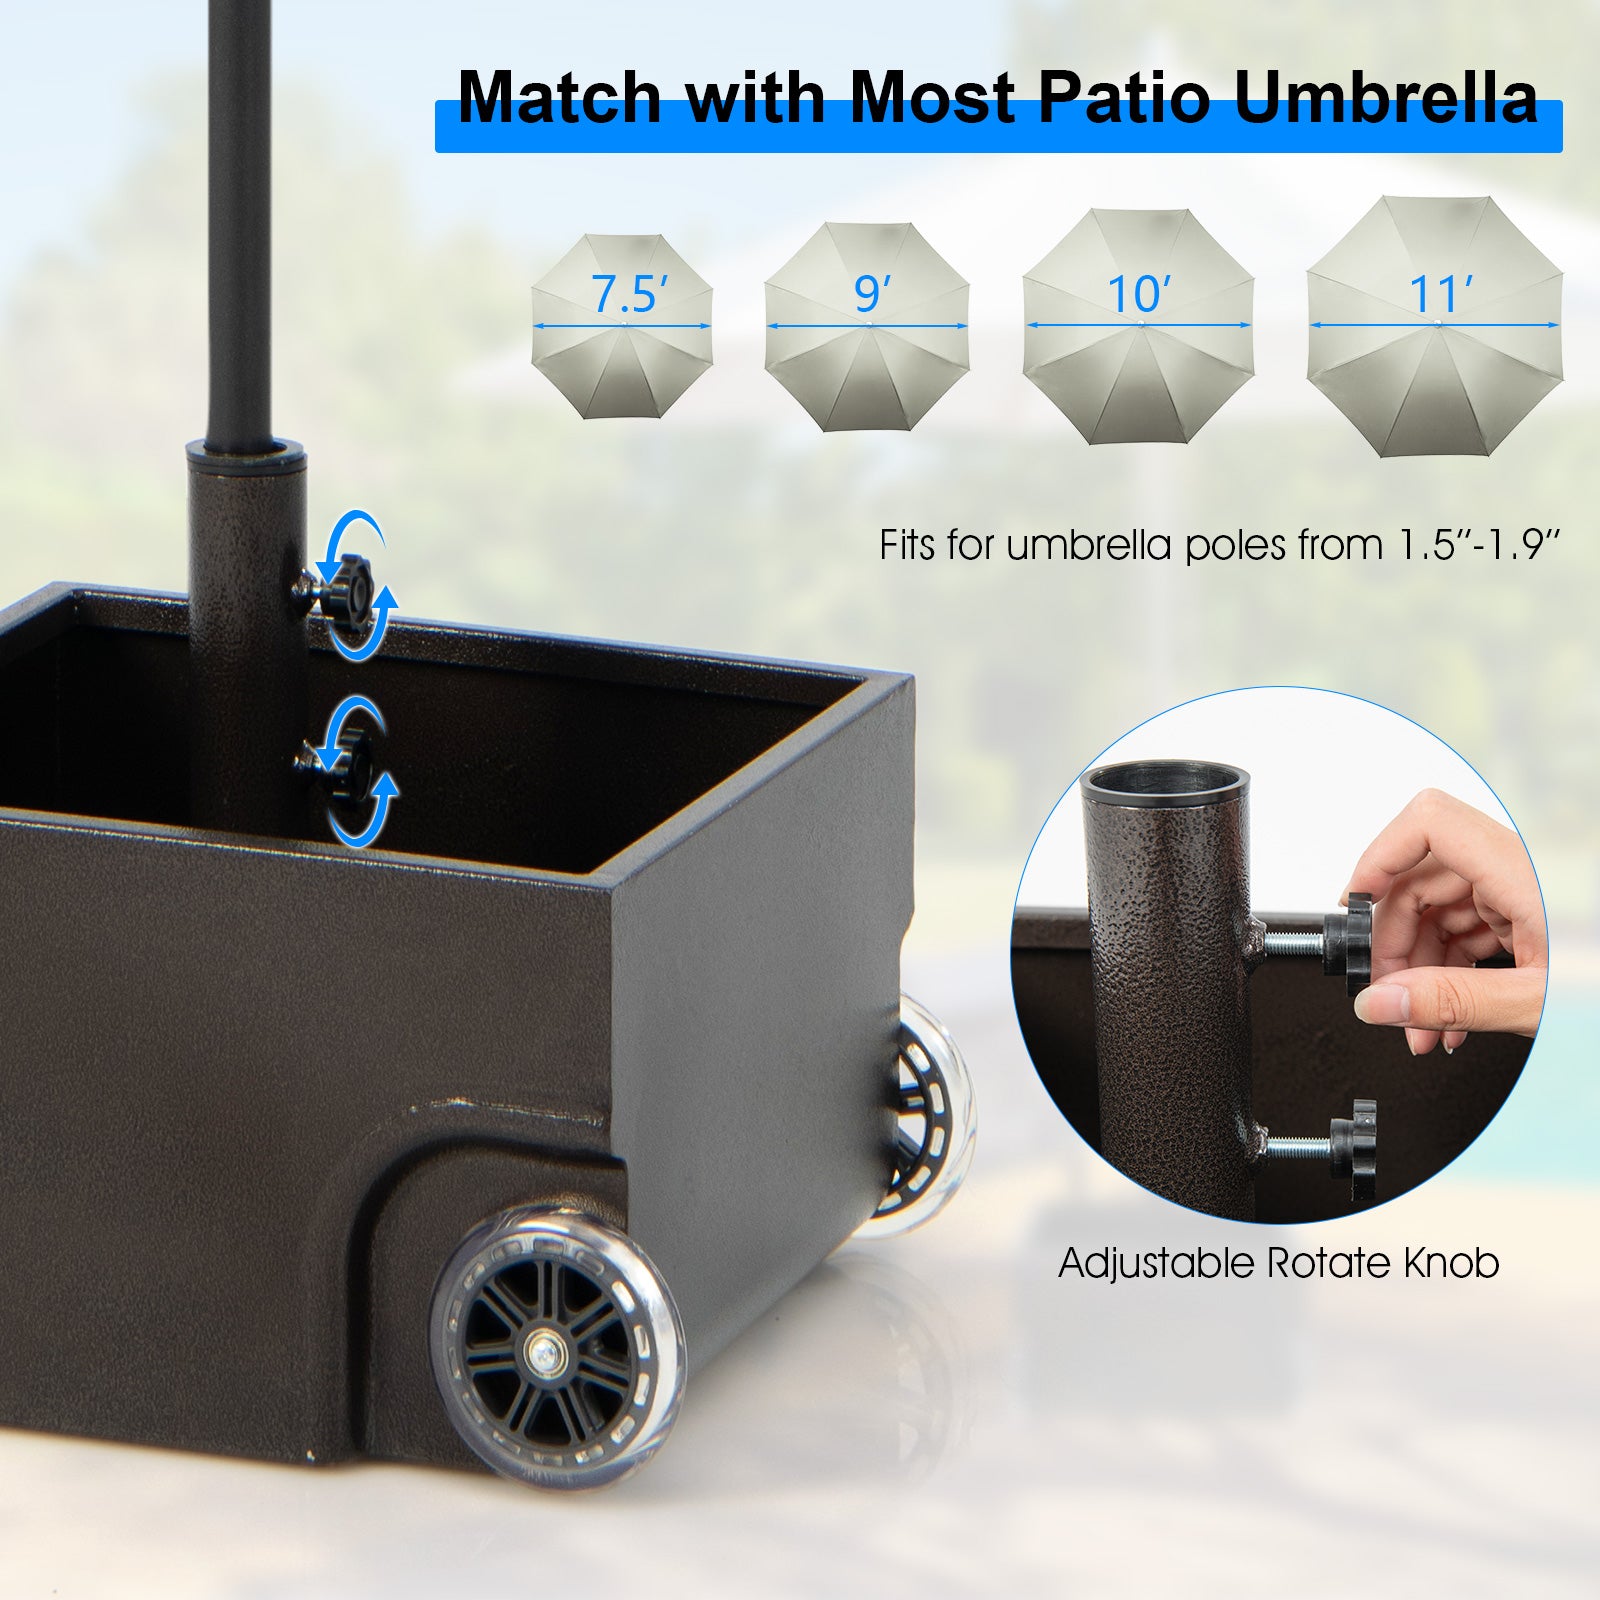 Compatible with 7.5-11ft Market Umbrellas: This umbrella stand is designed with 2 adapters to accommodate patio umbrella poles ranging from 1.6'' to 1.9'' in diameter. Without the adapters, the umbrella base can support umbrella poles up to 2.1'' in diameter. Two hand-tightening knobs are included to ensure a secure fit for various sizes of market umbrellas.